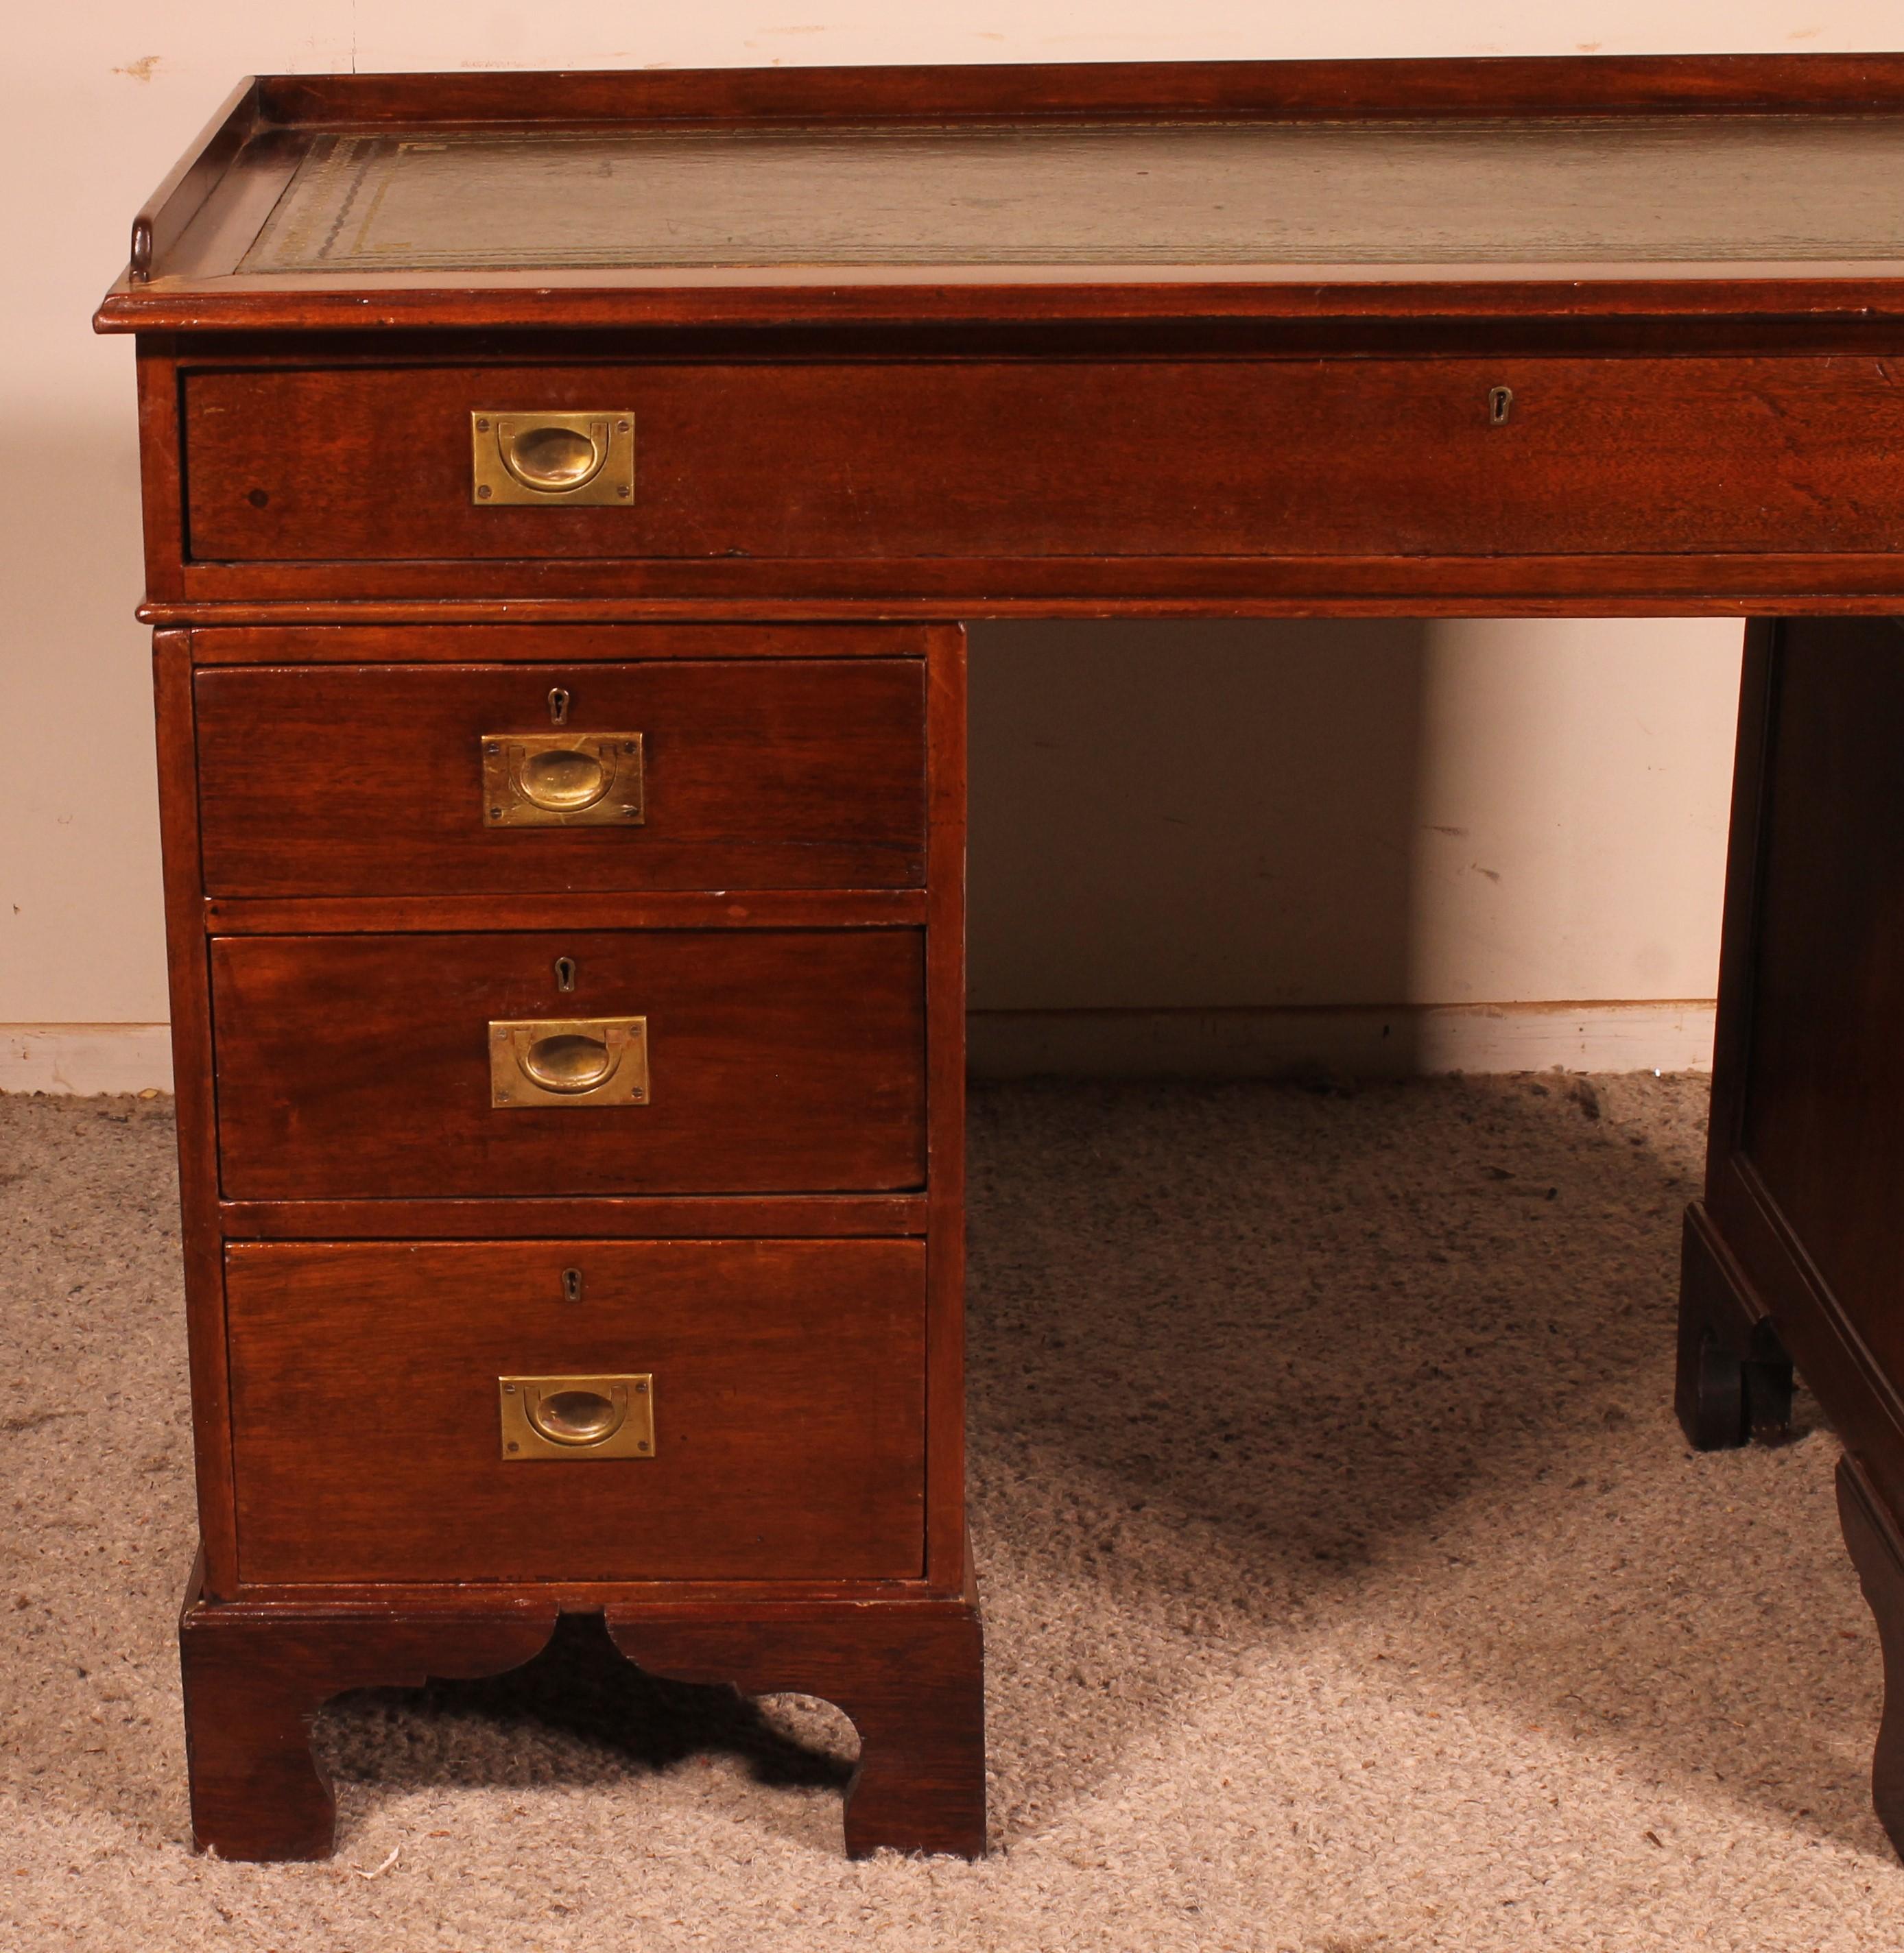 Elegant mahogany campaign desk or marine desk from the 19th century from England

Indeed this furniture called 